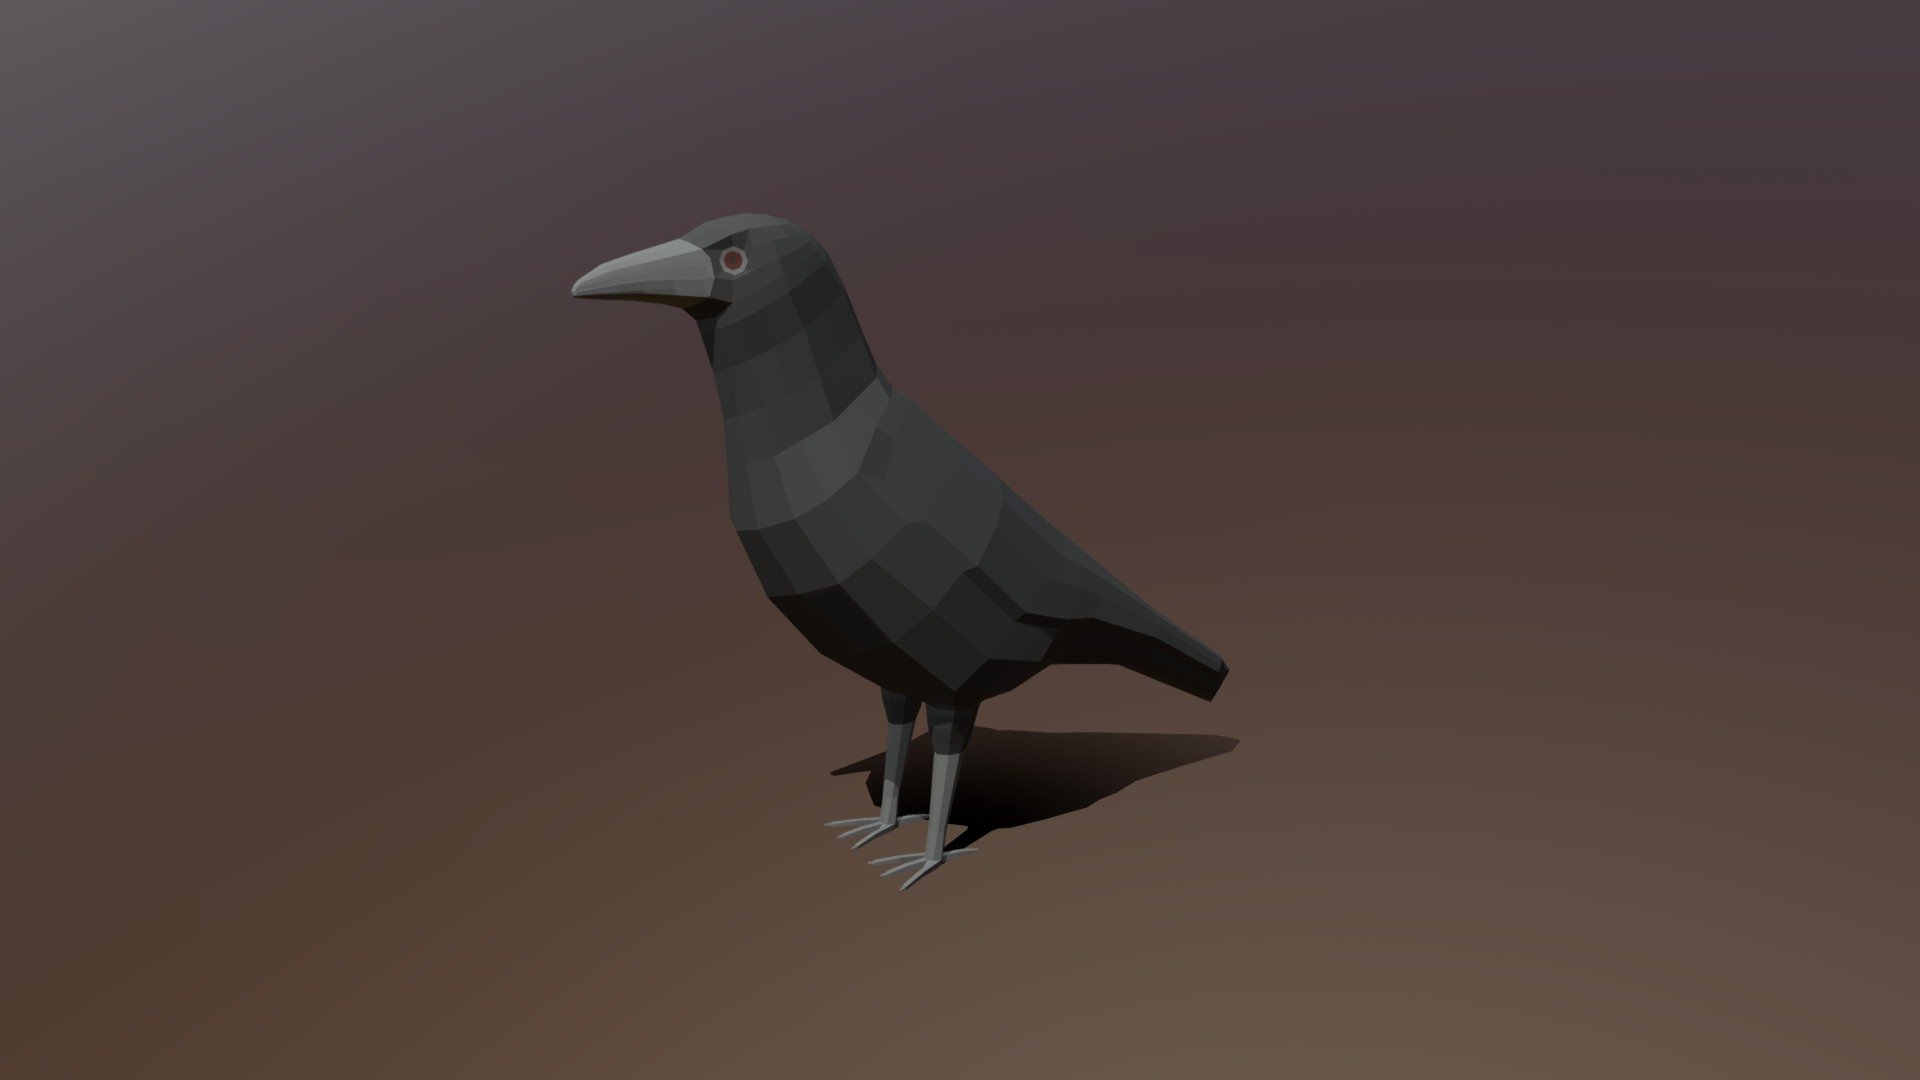 This is a low poly 3D model of a crow. The low poly crow was modeled and prepared for low-poly style renderings, background, general CG visualization presented as a mesh with quads only.

Verts : 766 Faces: 764

The 3D model have simple materials with diffuse colors.

No ring, maps and no UVW mapping is available.

The original file was created in blender. You will receive a 3DS, OBJ, FBX, blend, DAE, Stl.

All preview images were rendered with Blender Cycles. Product is ready to render out-of-the-box. Please note that the lights, cameras, and background is only included in the .blend file. The model is clean and alone in the other provided files, centred at origin and has real-world scale 3d model